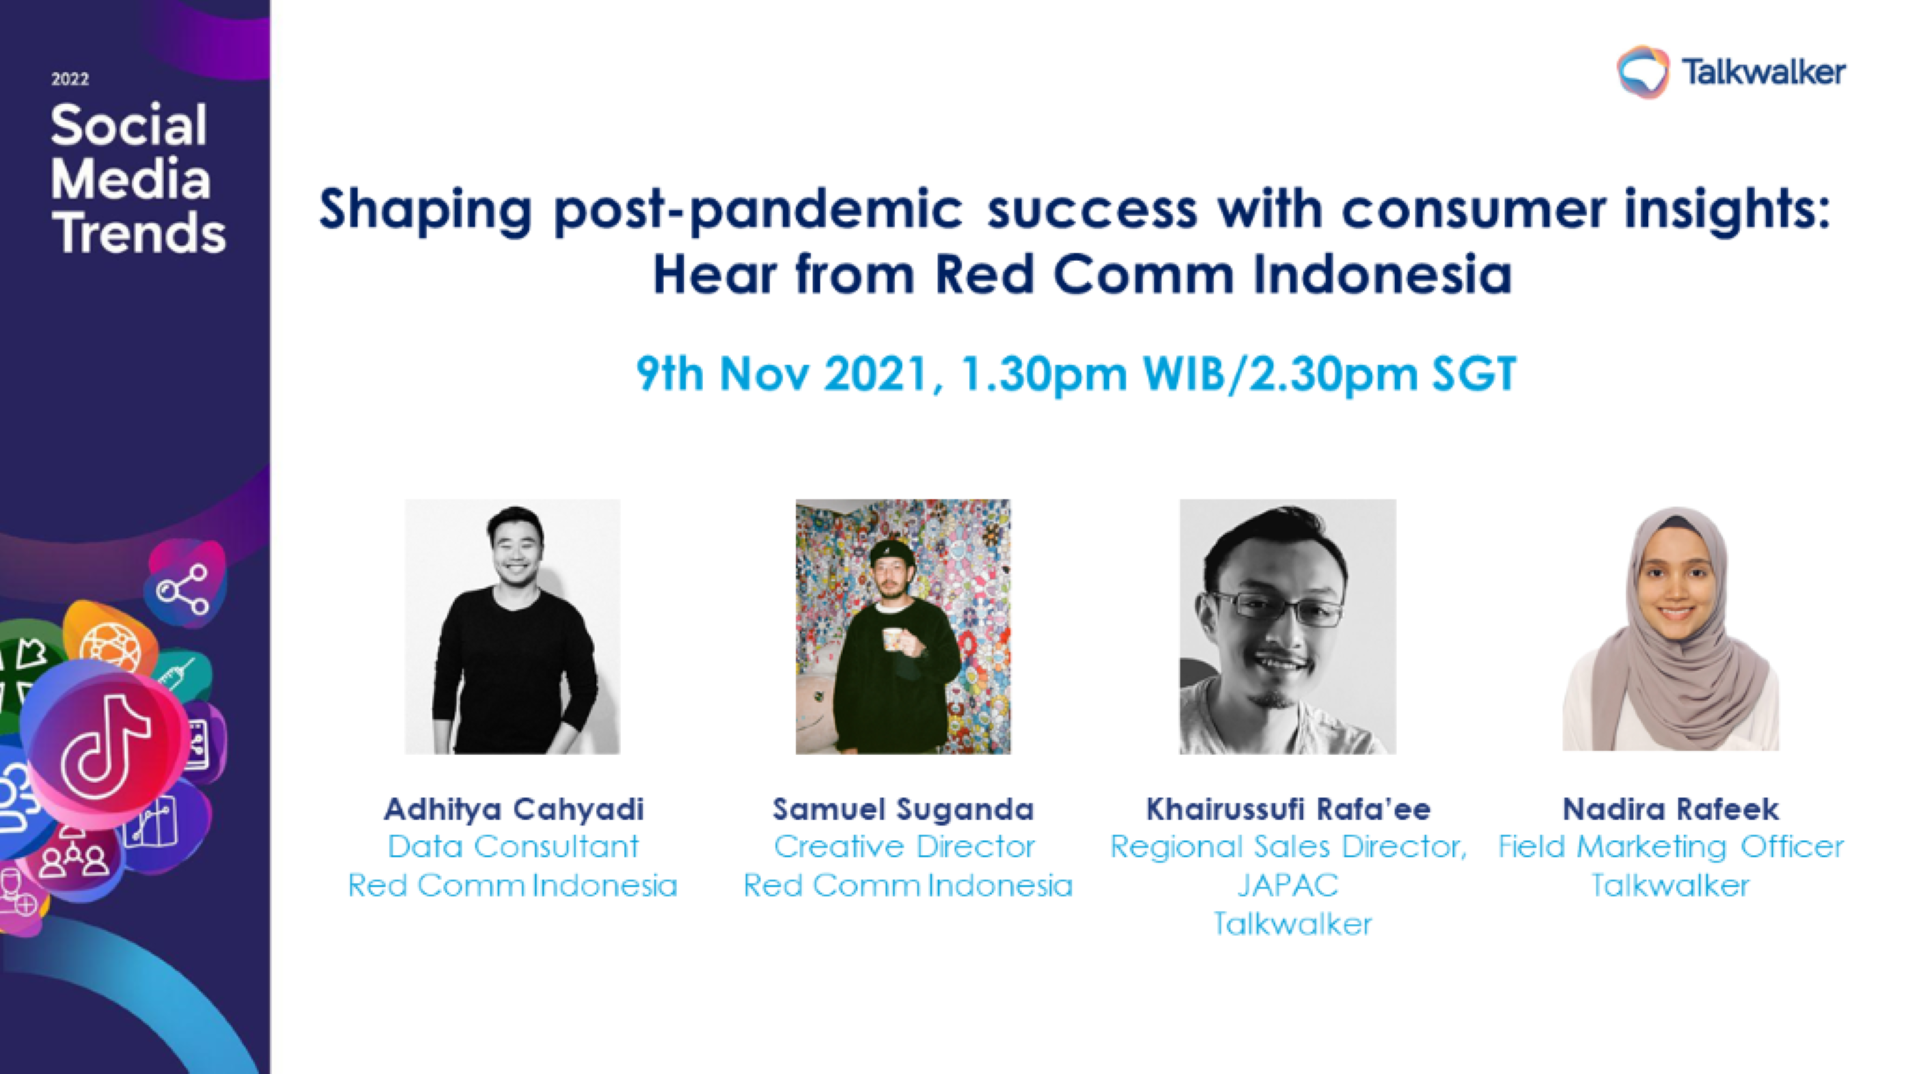 Shaping post-pandemic success with consumer insights: Red Comm Indonesia